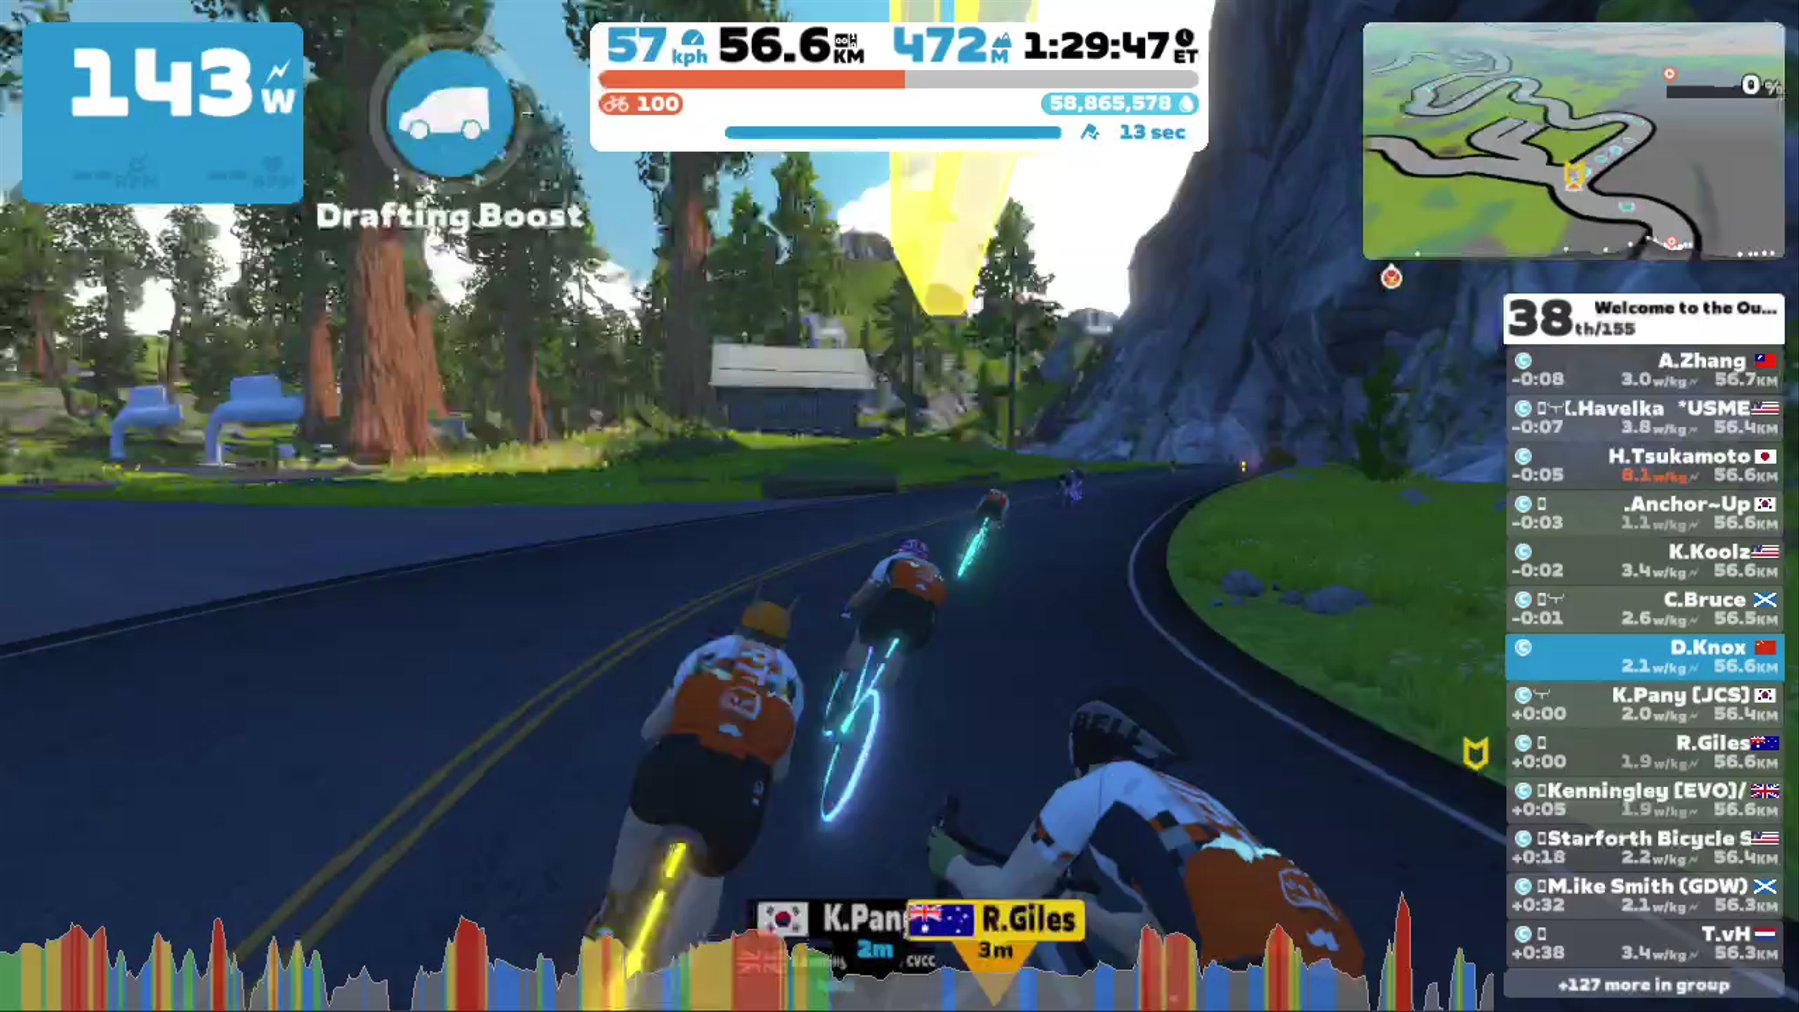 Zwift - Group Ride: Welcome to the Outback DIRT ride (C) on Sand And Sequoias in Watopia